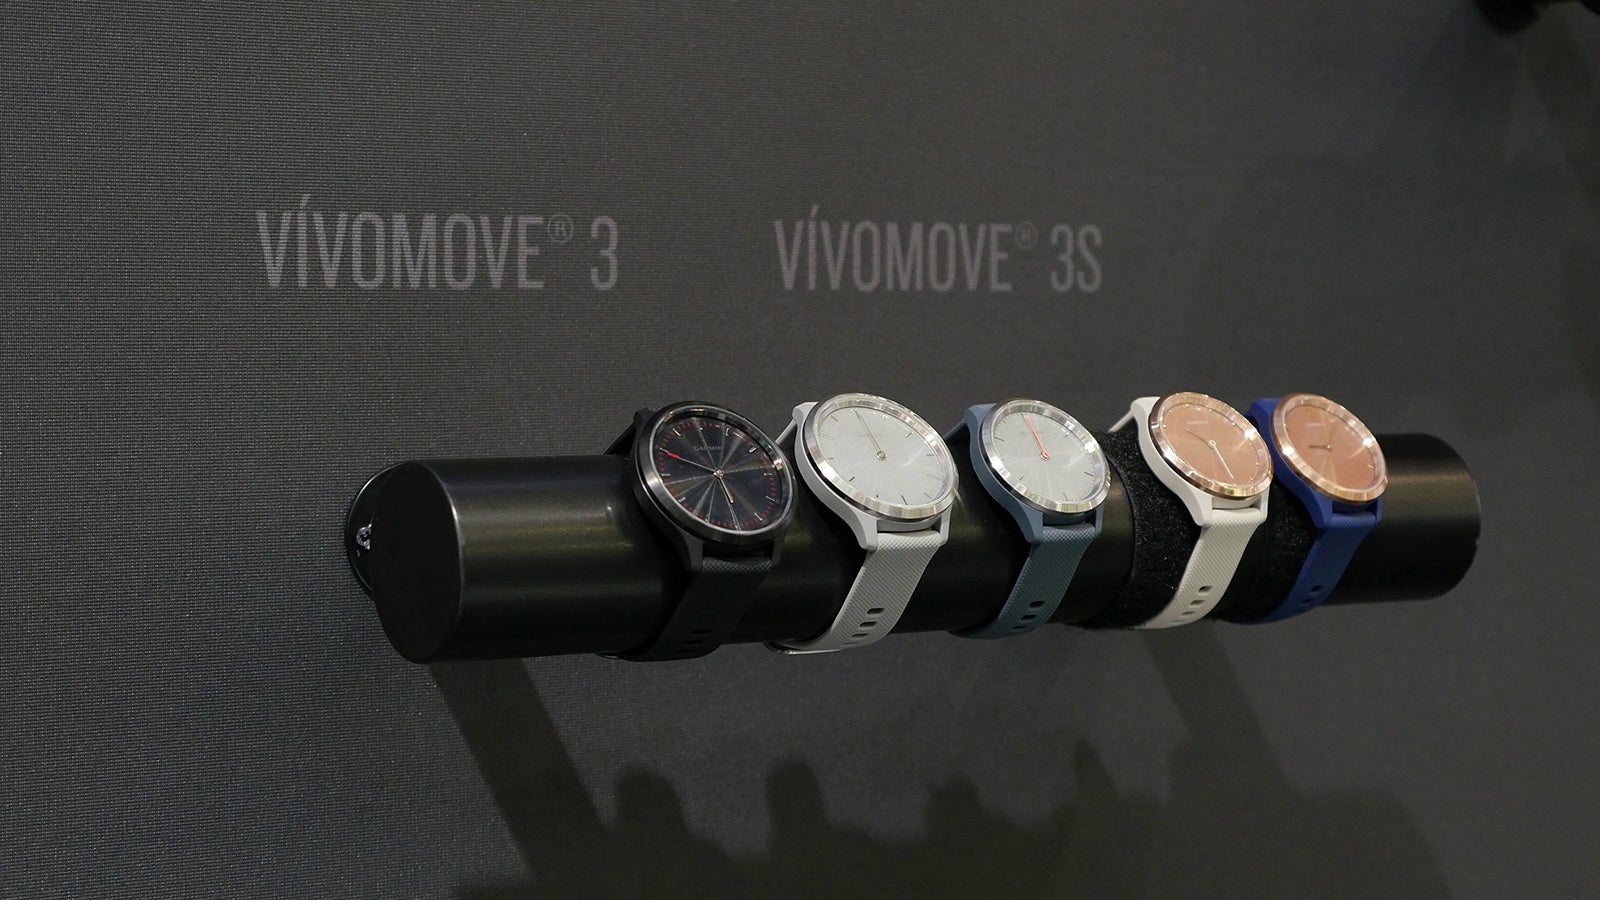 Garmin Vivomove 3 series: an incredibly classy watch with a hidden smart  display (hands-on) - PhoneArena